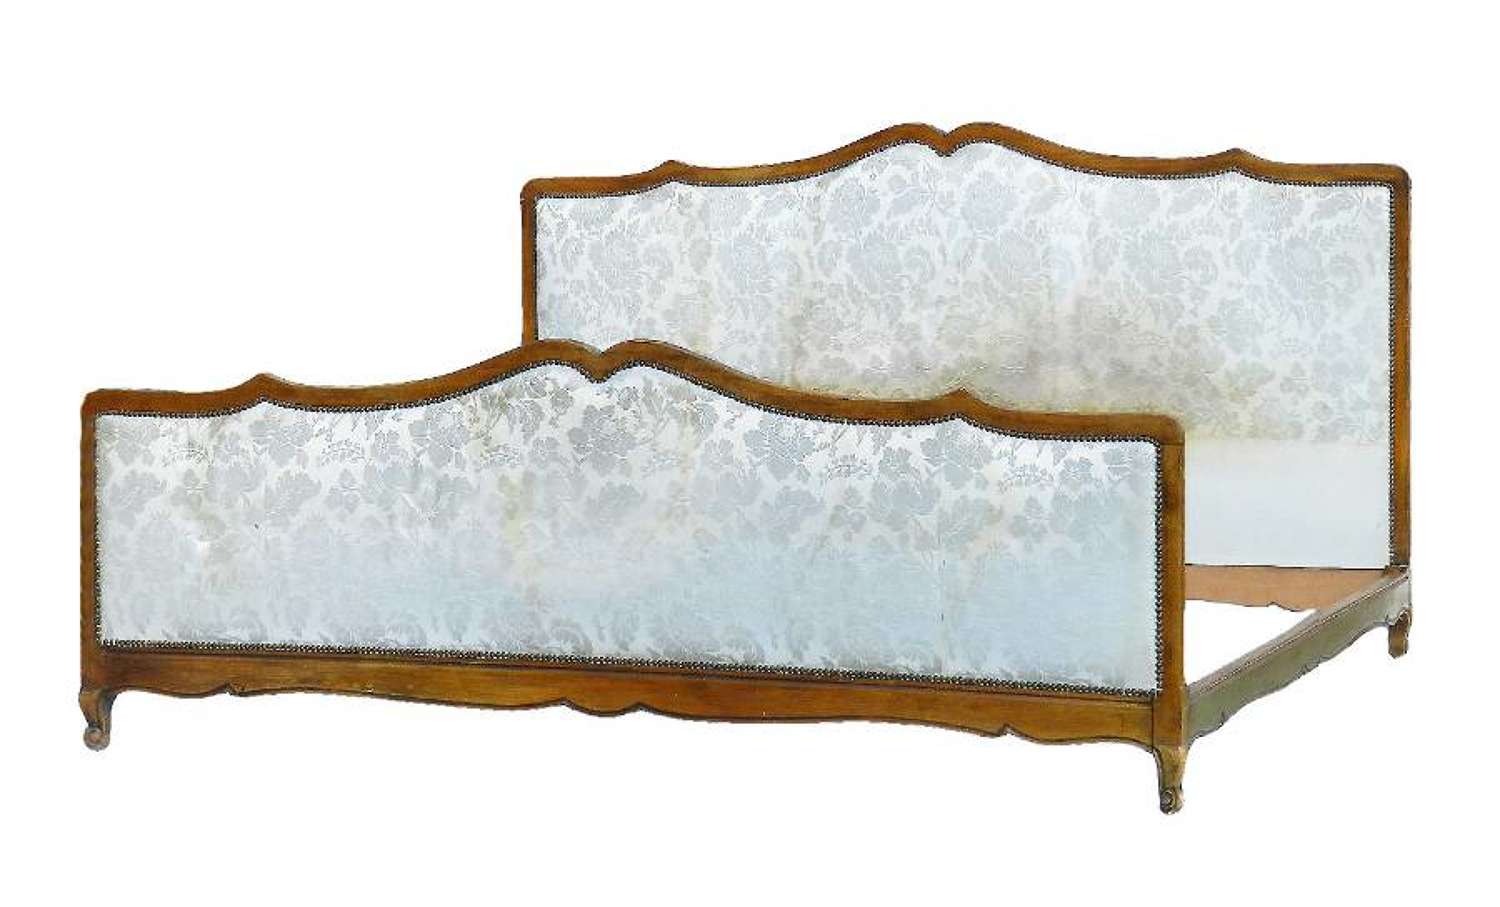 Emperor Size French Antique Bed Huge 200cms 80 ins Wide includes Recover Customize